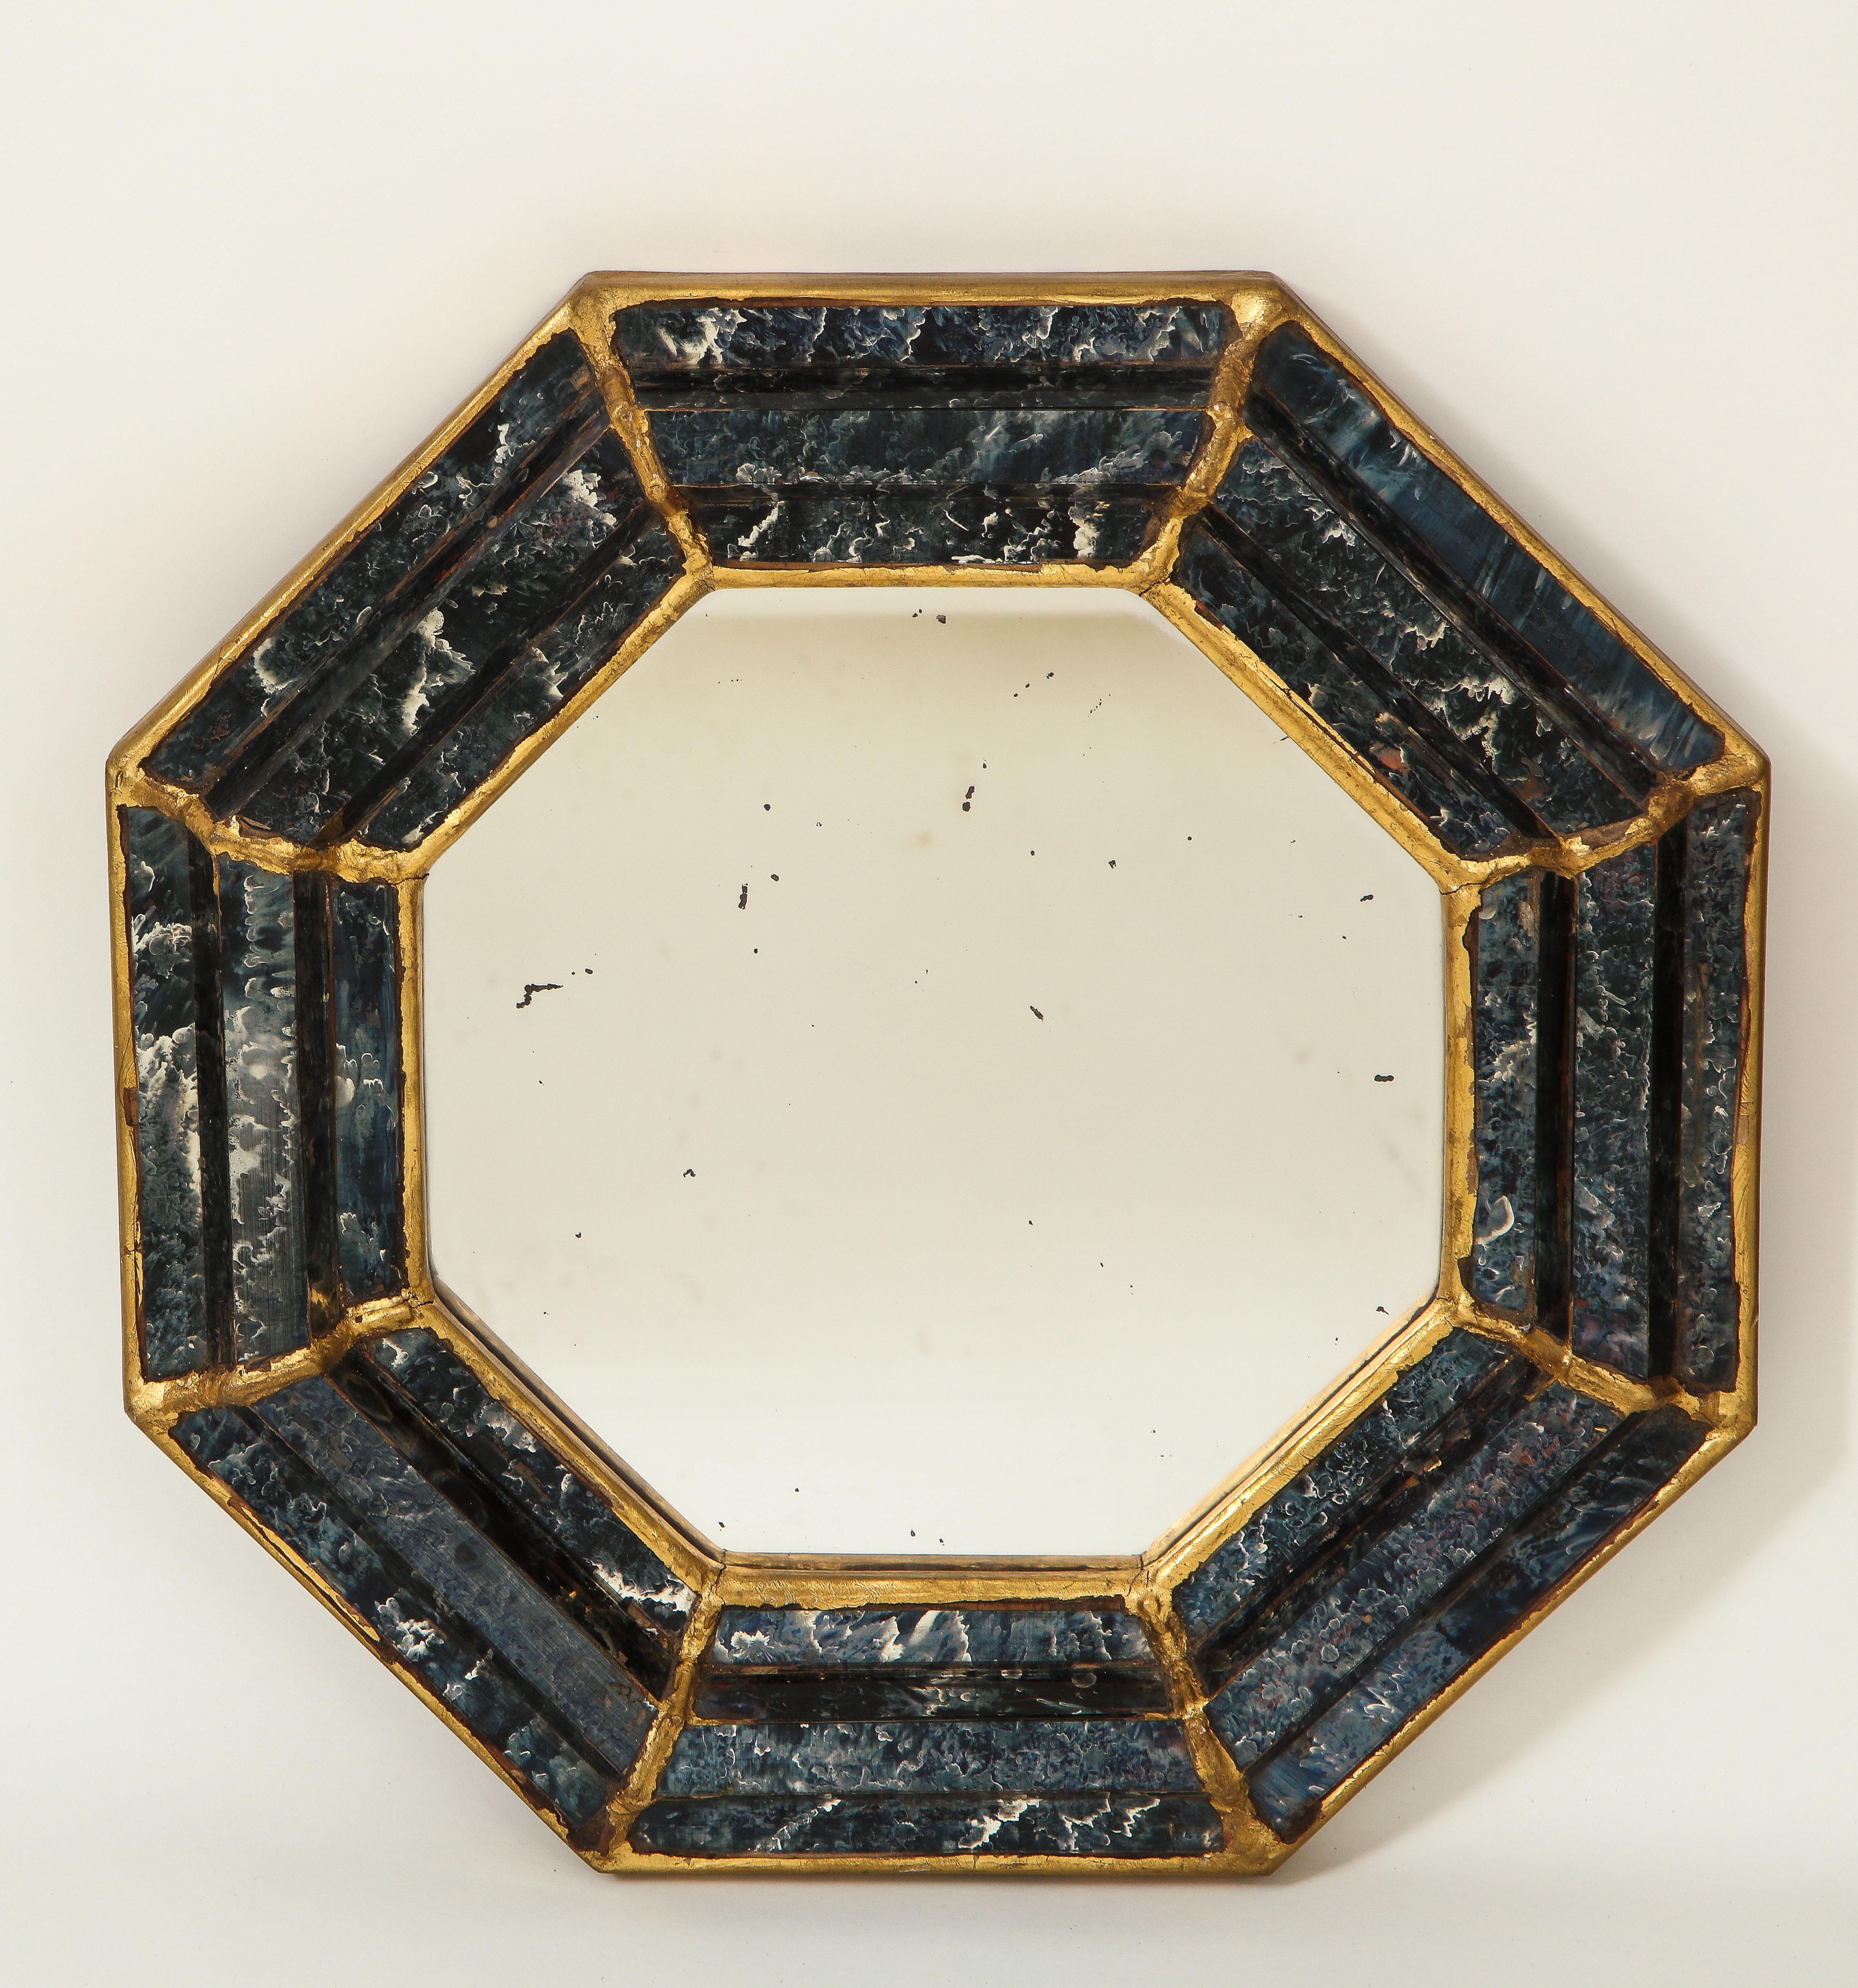 Each mirror plate within a conforming reverse painted glass border with blue faux marble decoration and gilt borders.